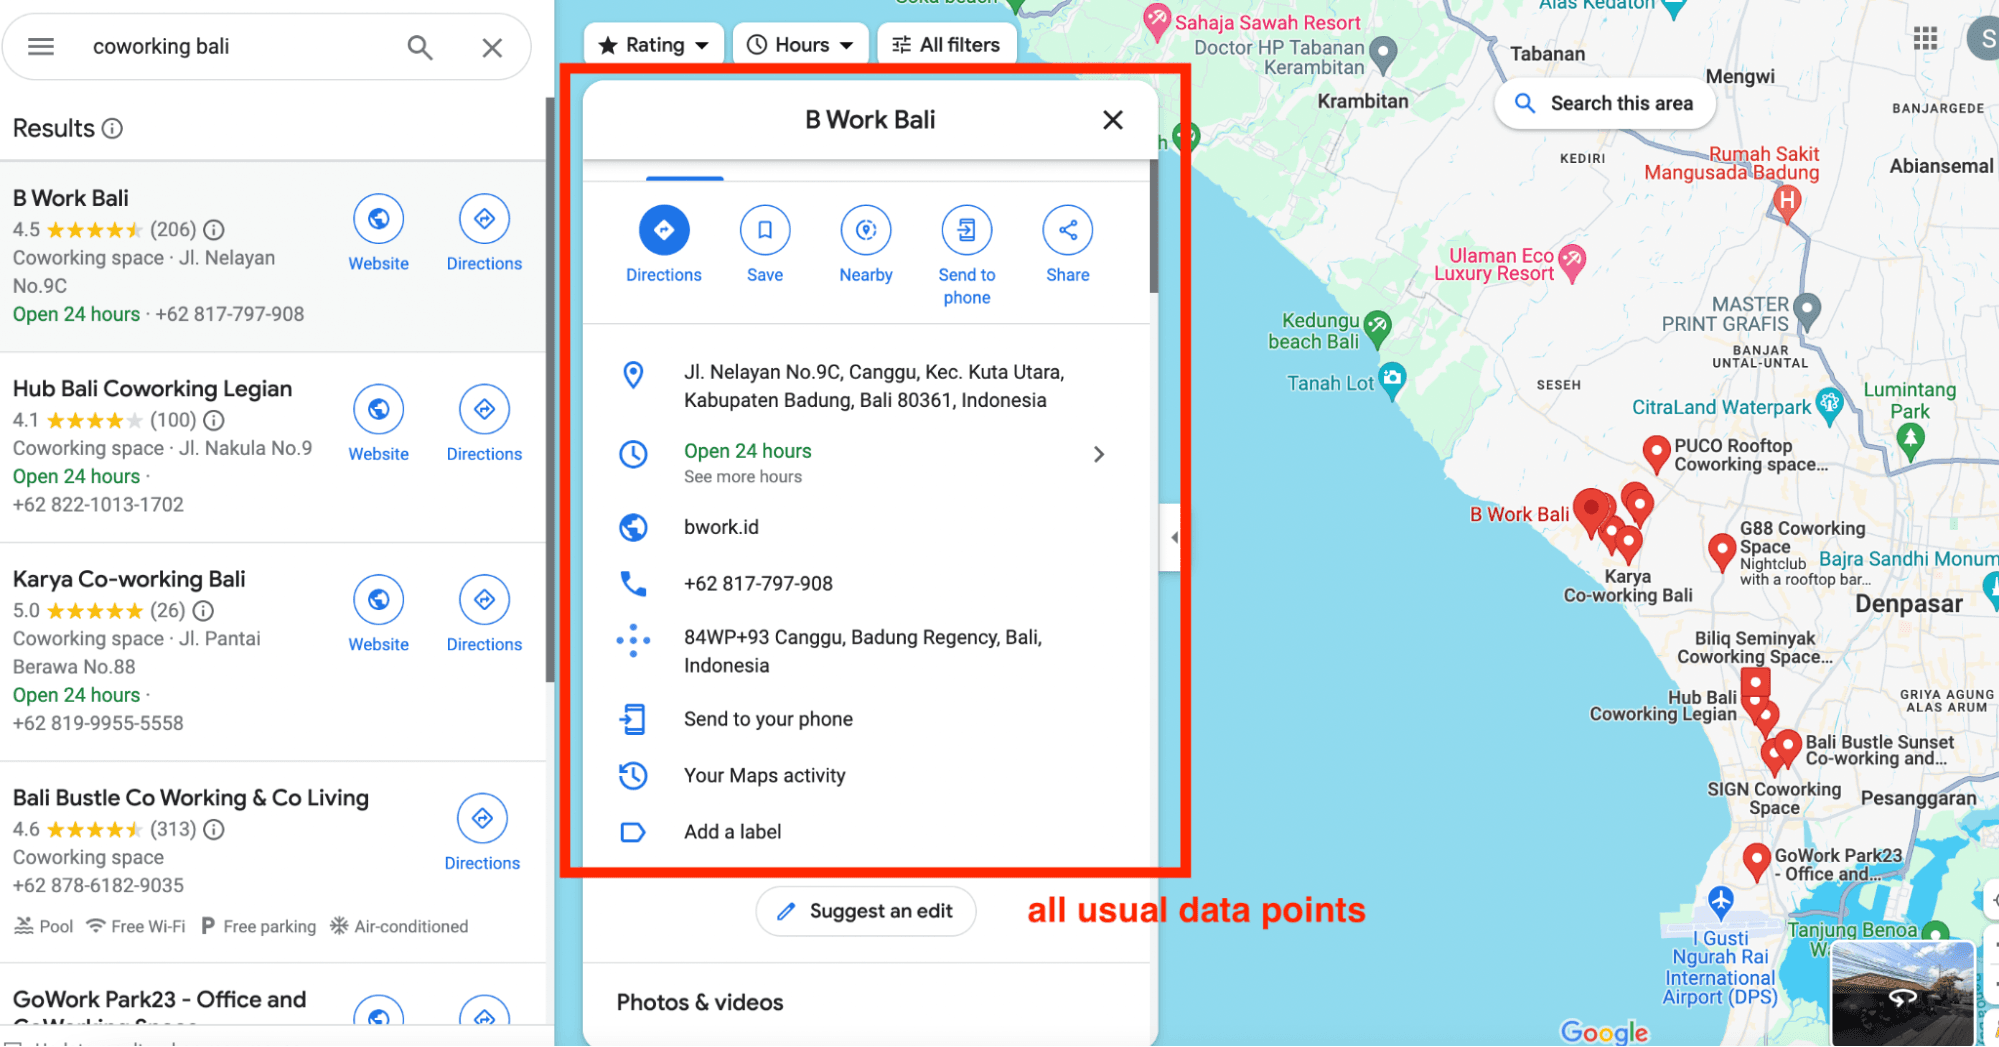 all usual datapoints are scraped from google maps by lobstr - image28.png